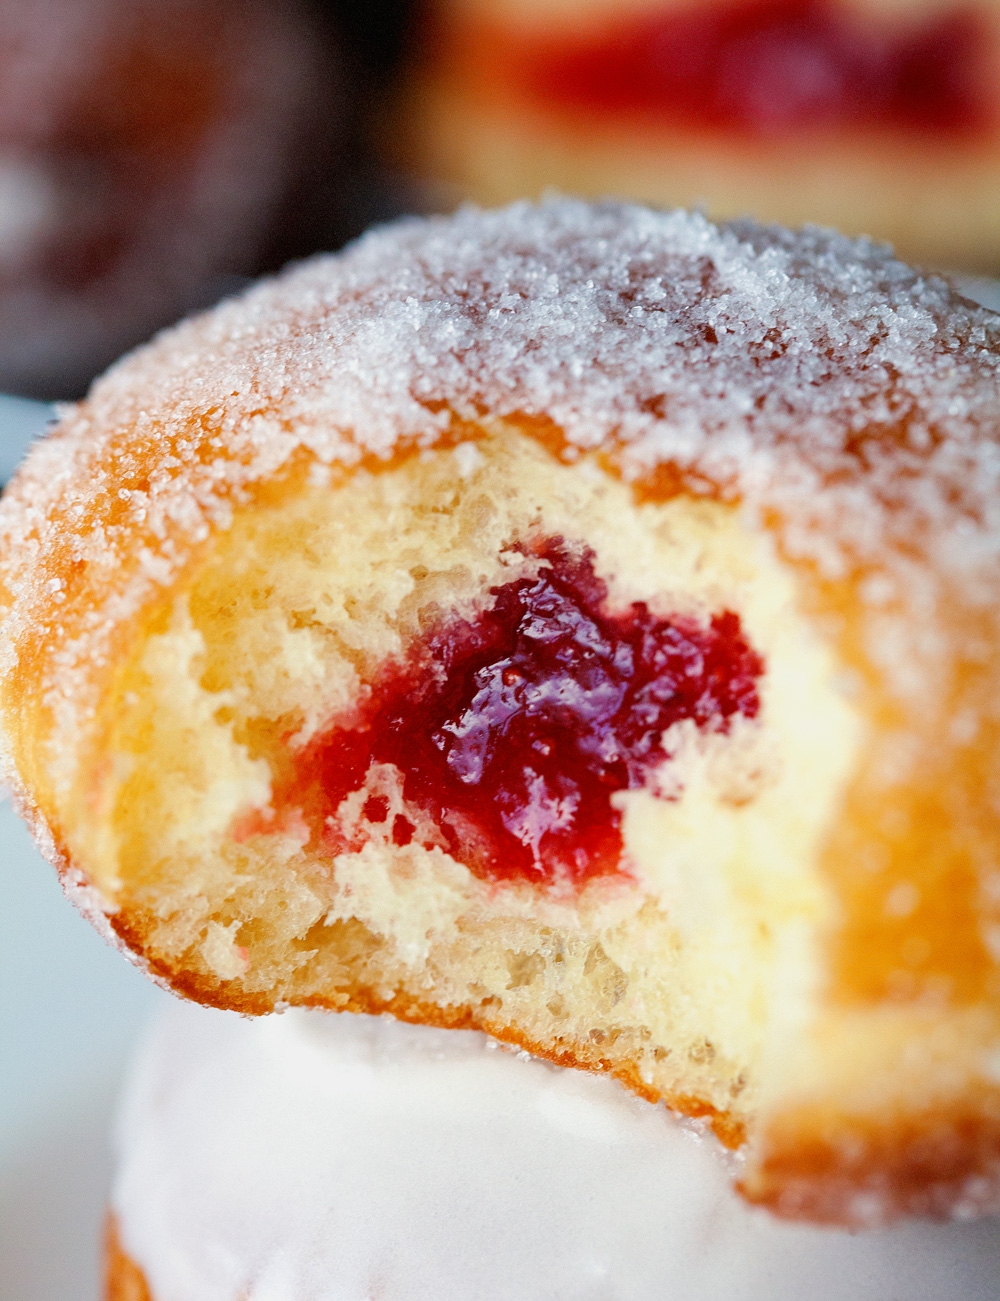 Homemade Jelly Doughnuts by Deliciously Yum!